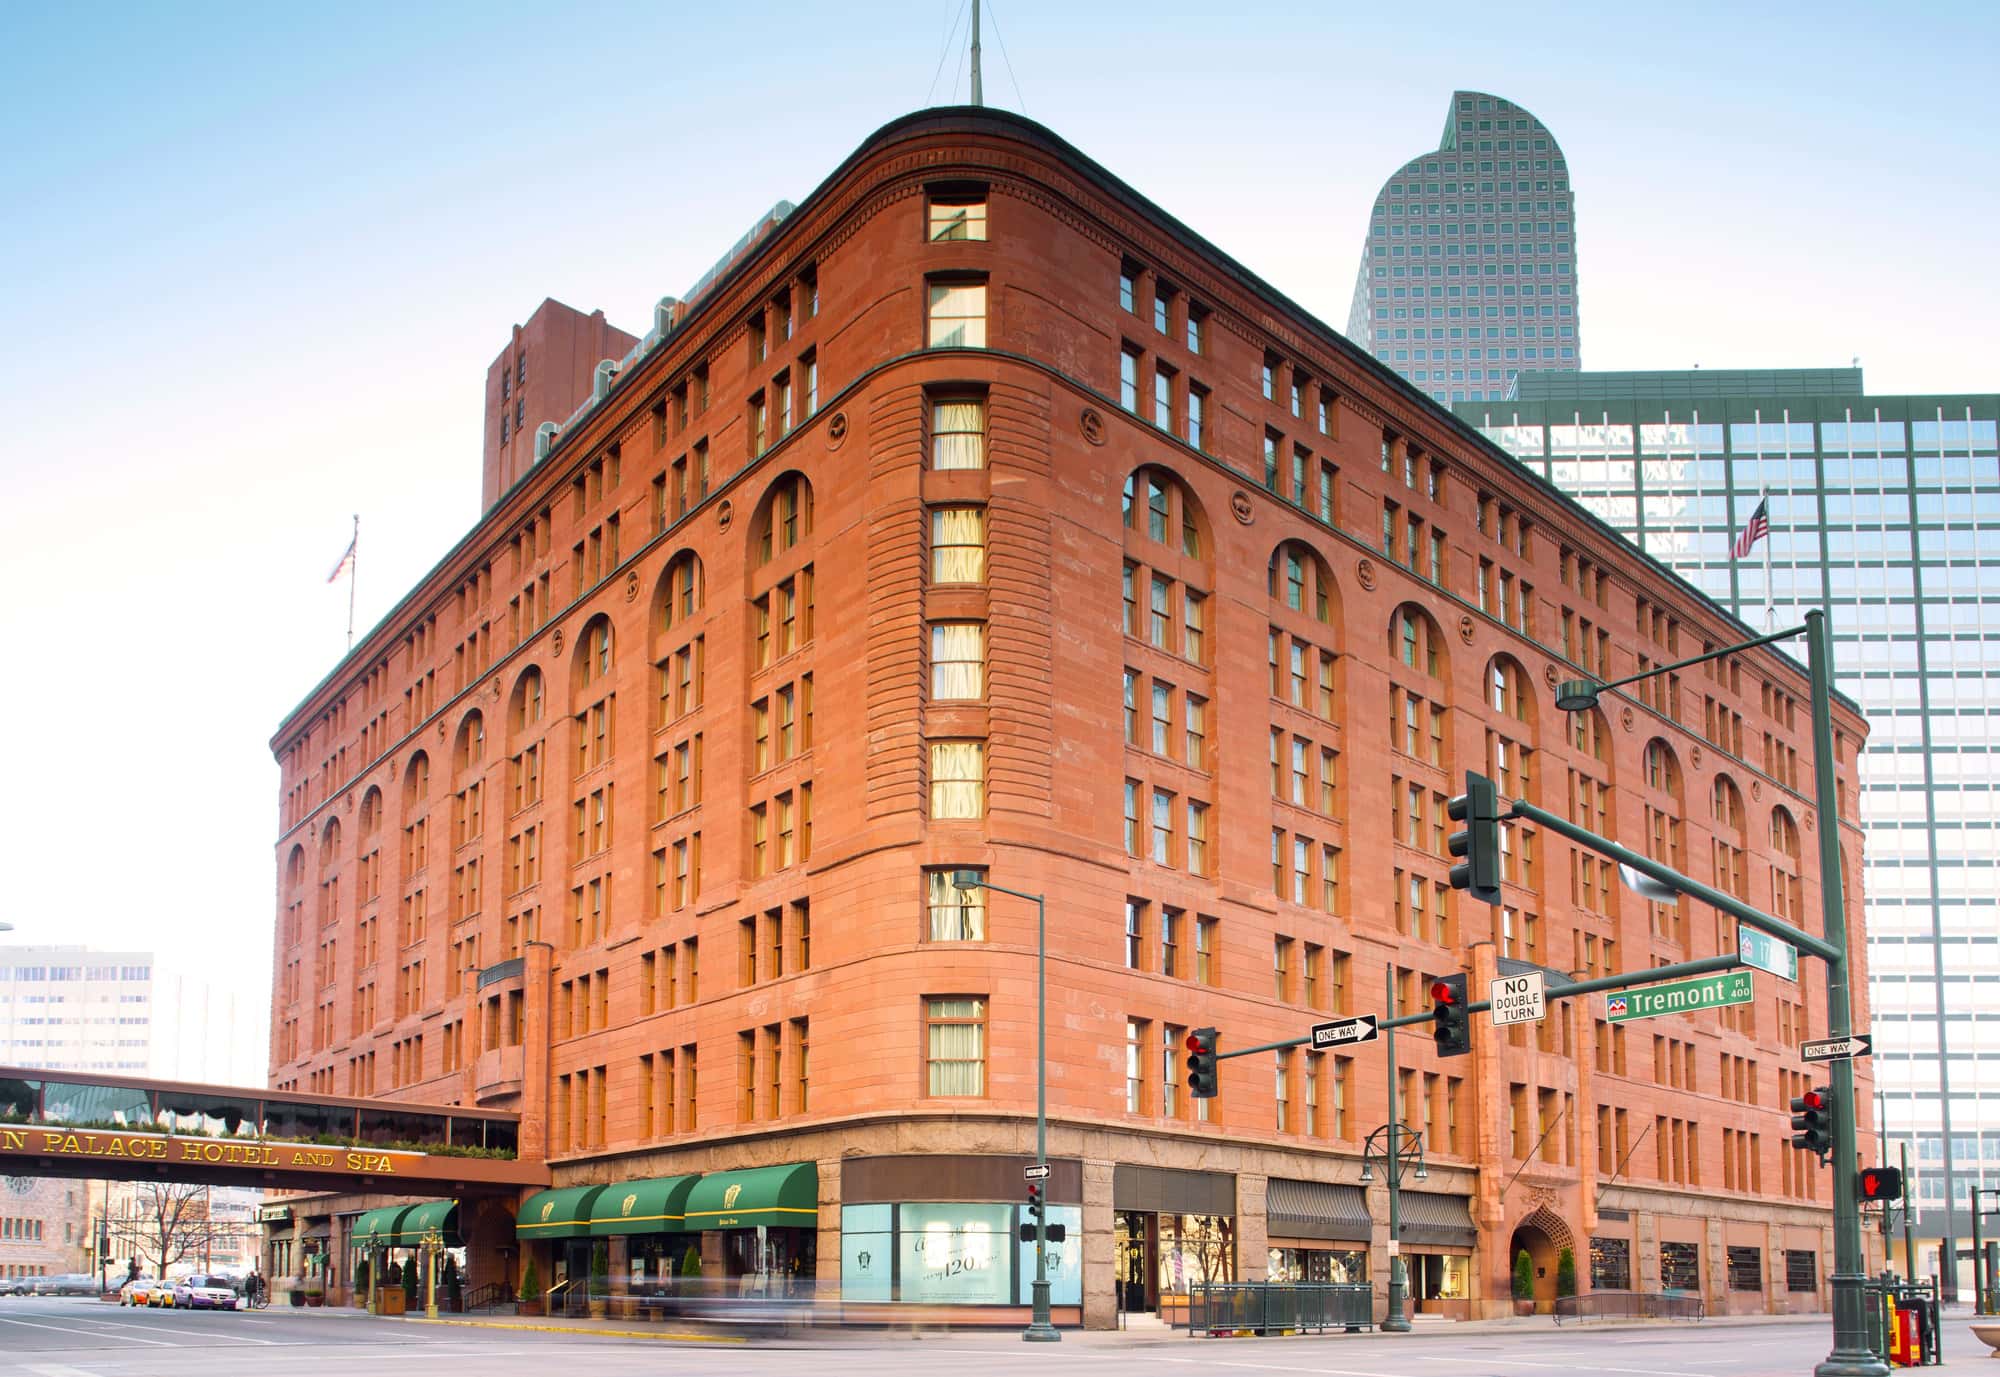 The Brown Palace Hotel & Spa Expert Review | Fodor’s Travel